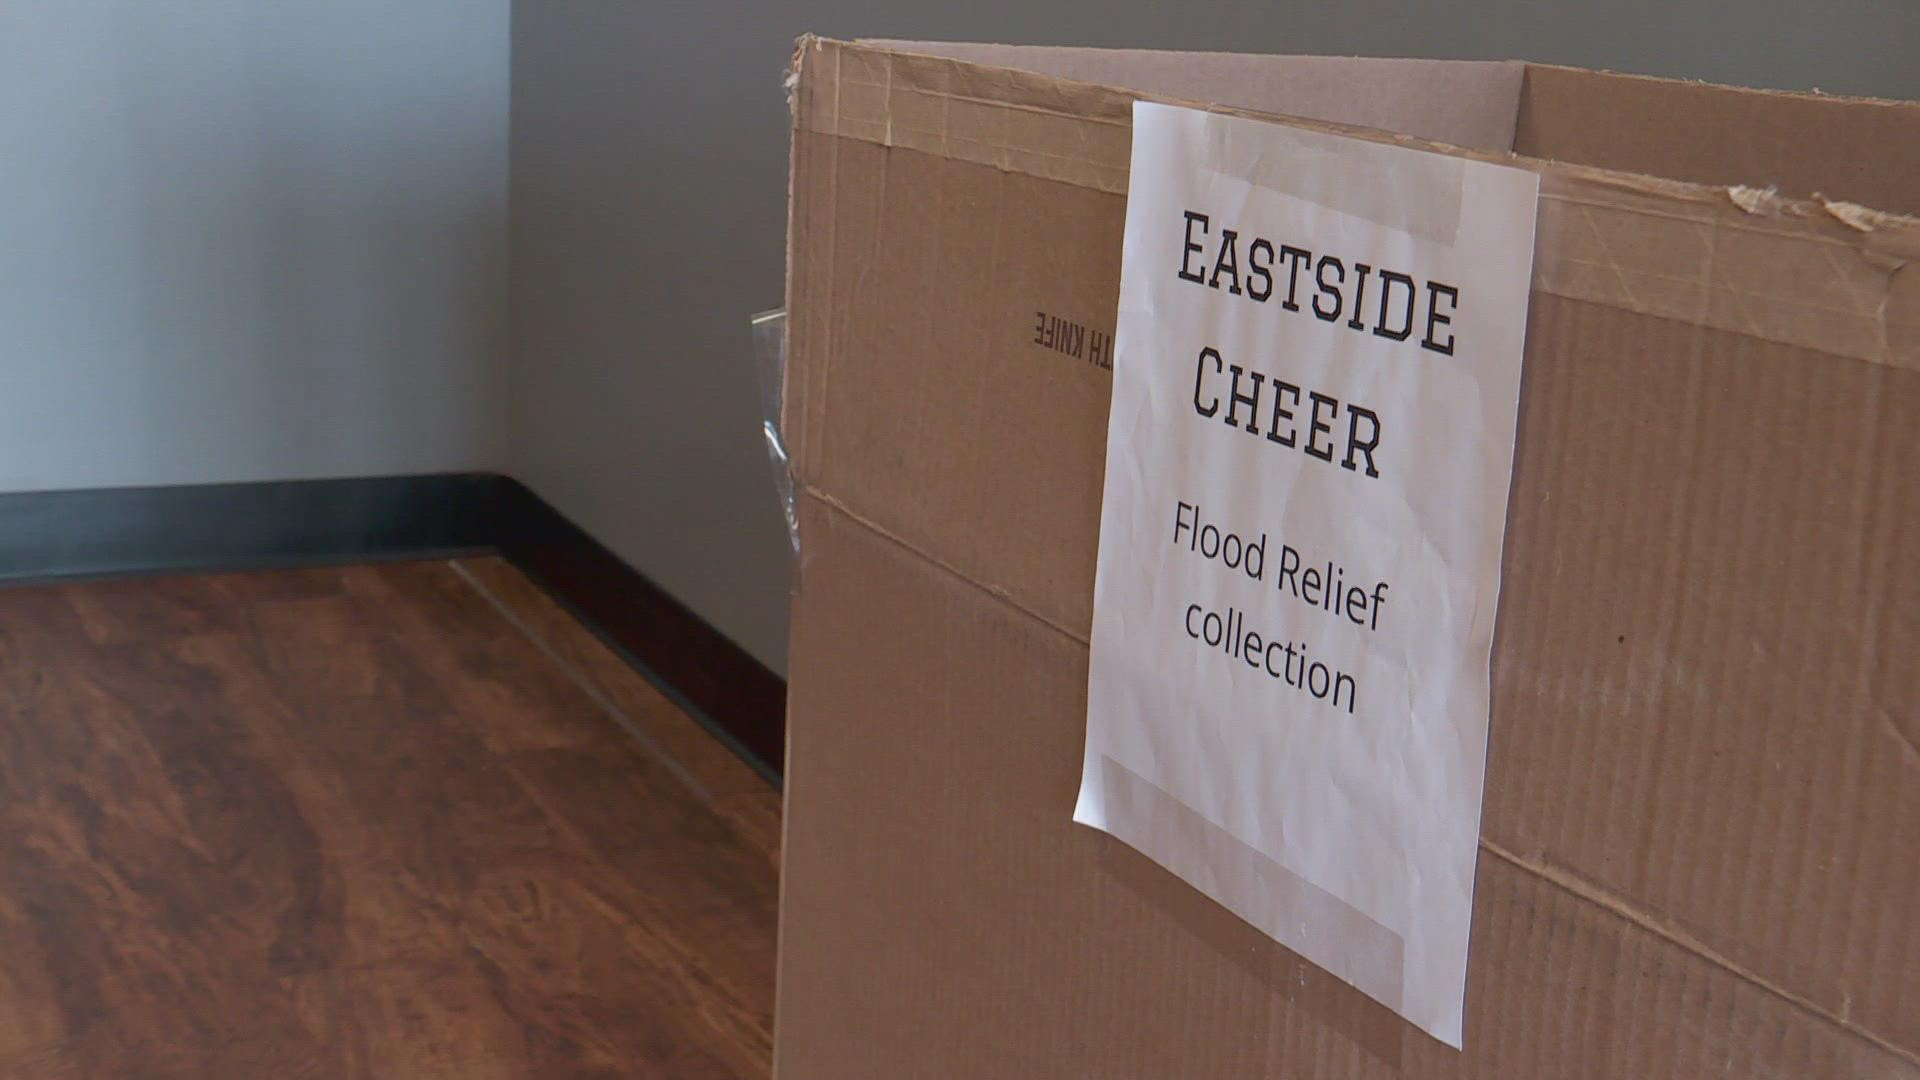 Knott County Central's cheerleading program lost a lot of their cheer supplies in the flood, so the cheerleader's at Eastside Middle School decided to help.